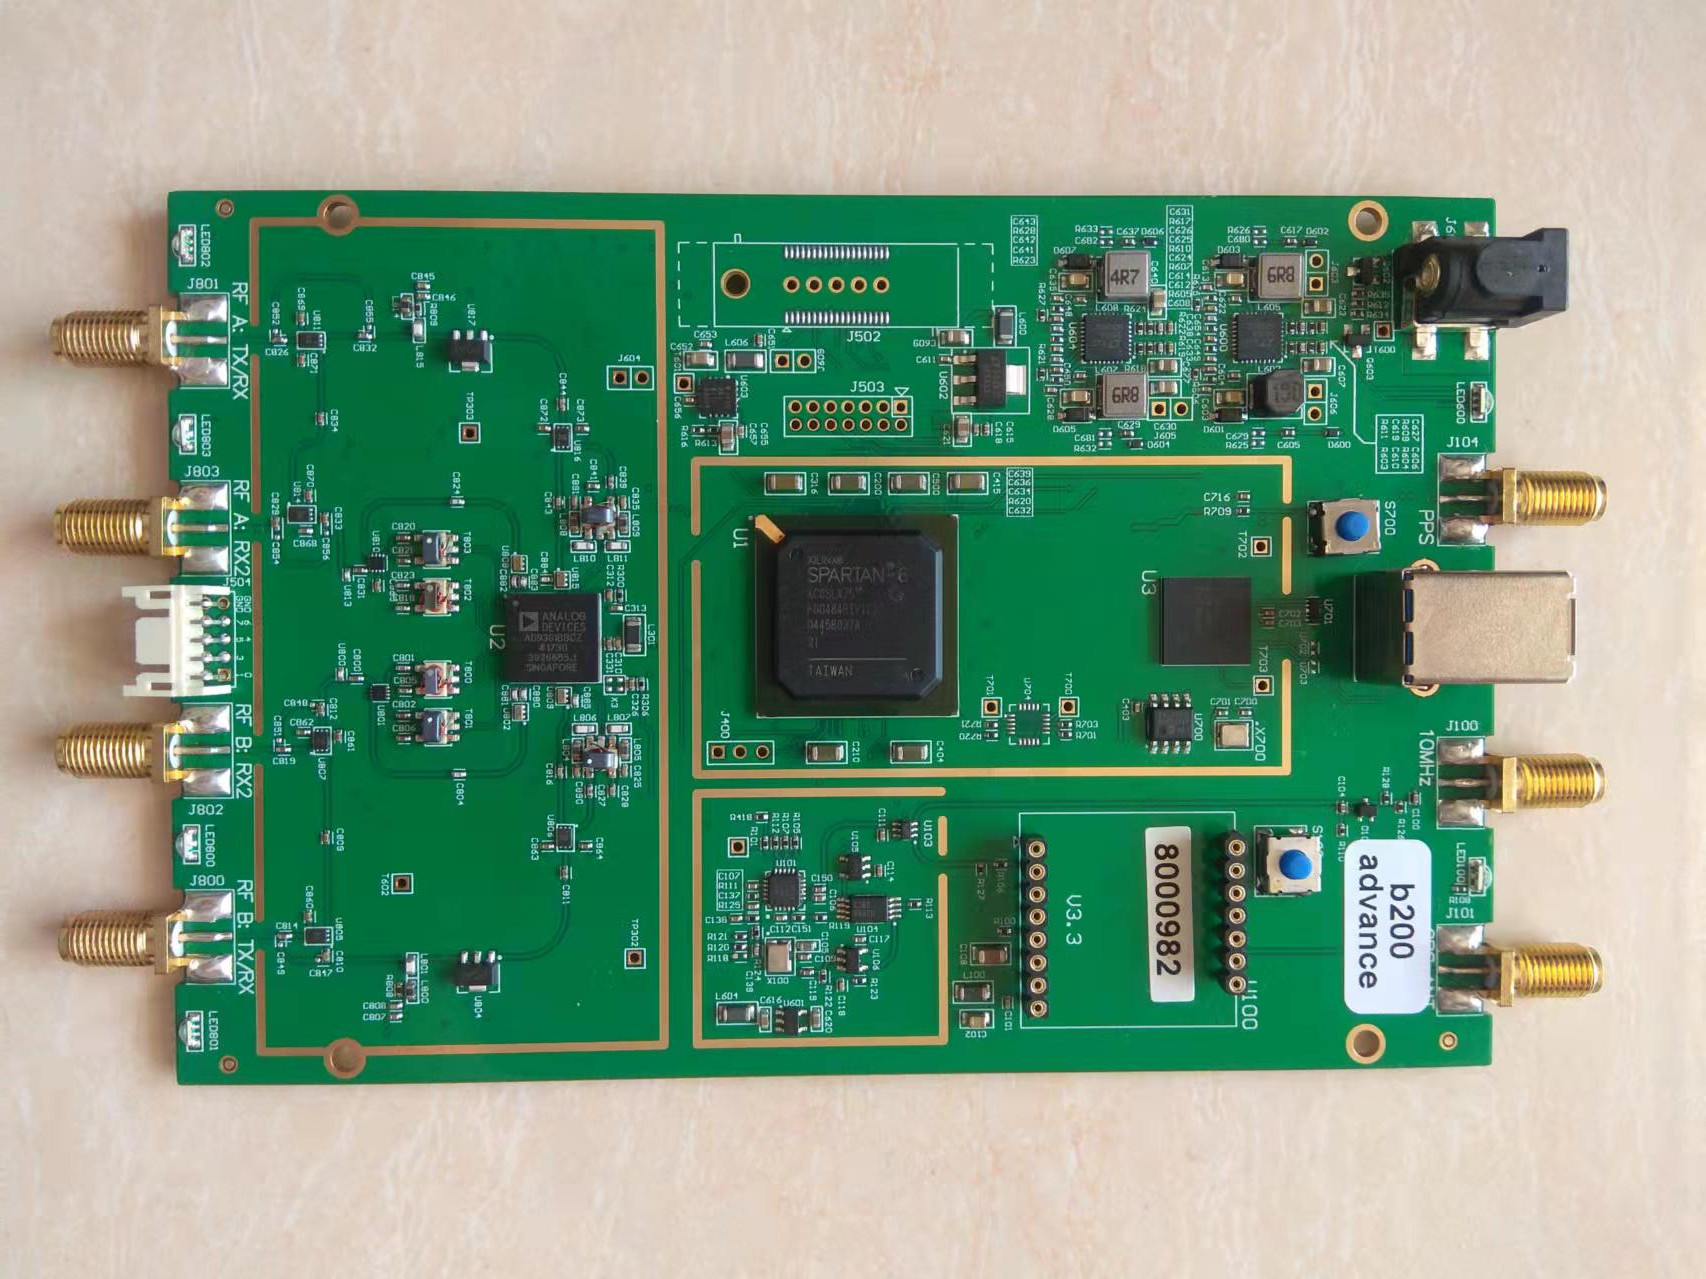 B200 advance sdr compatible to usrp b200 can replace B210